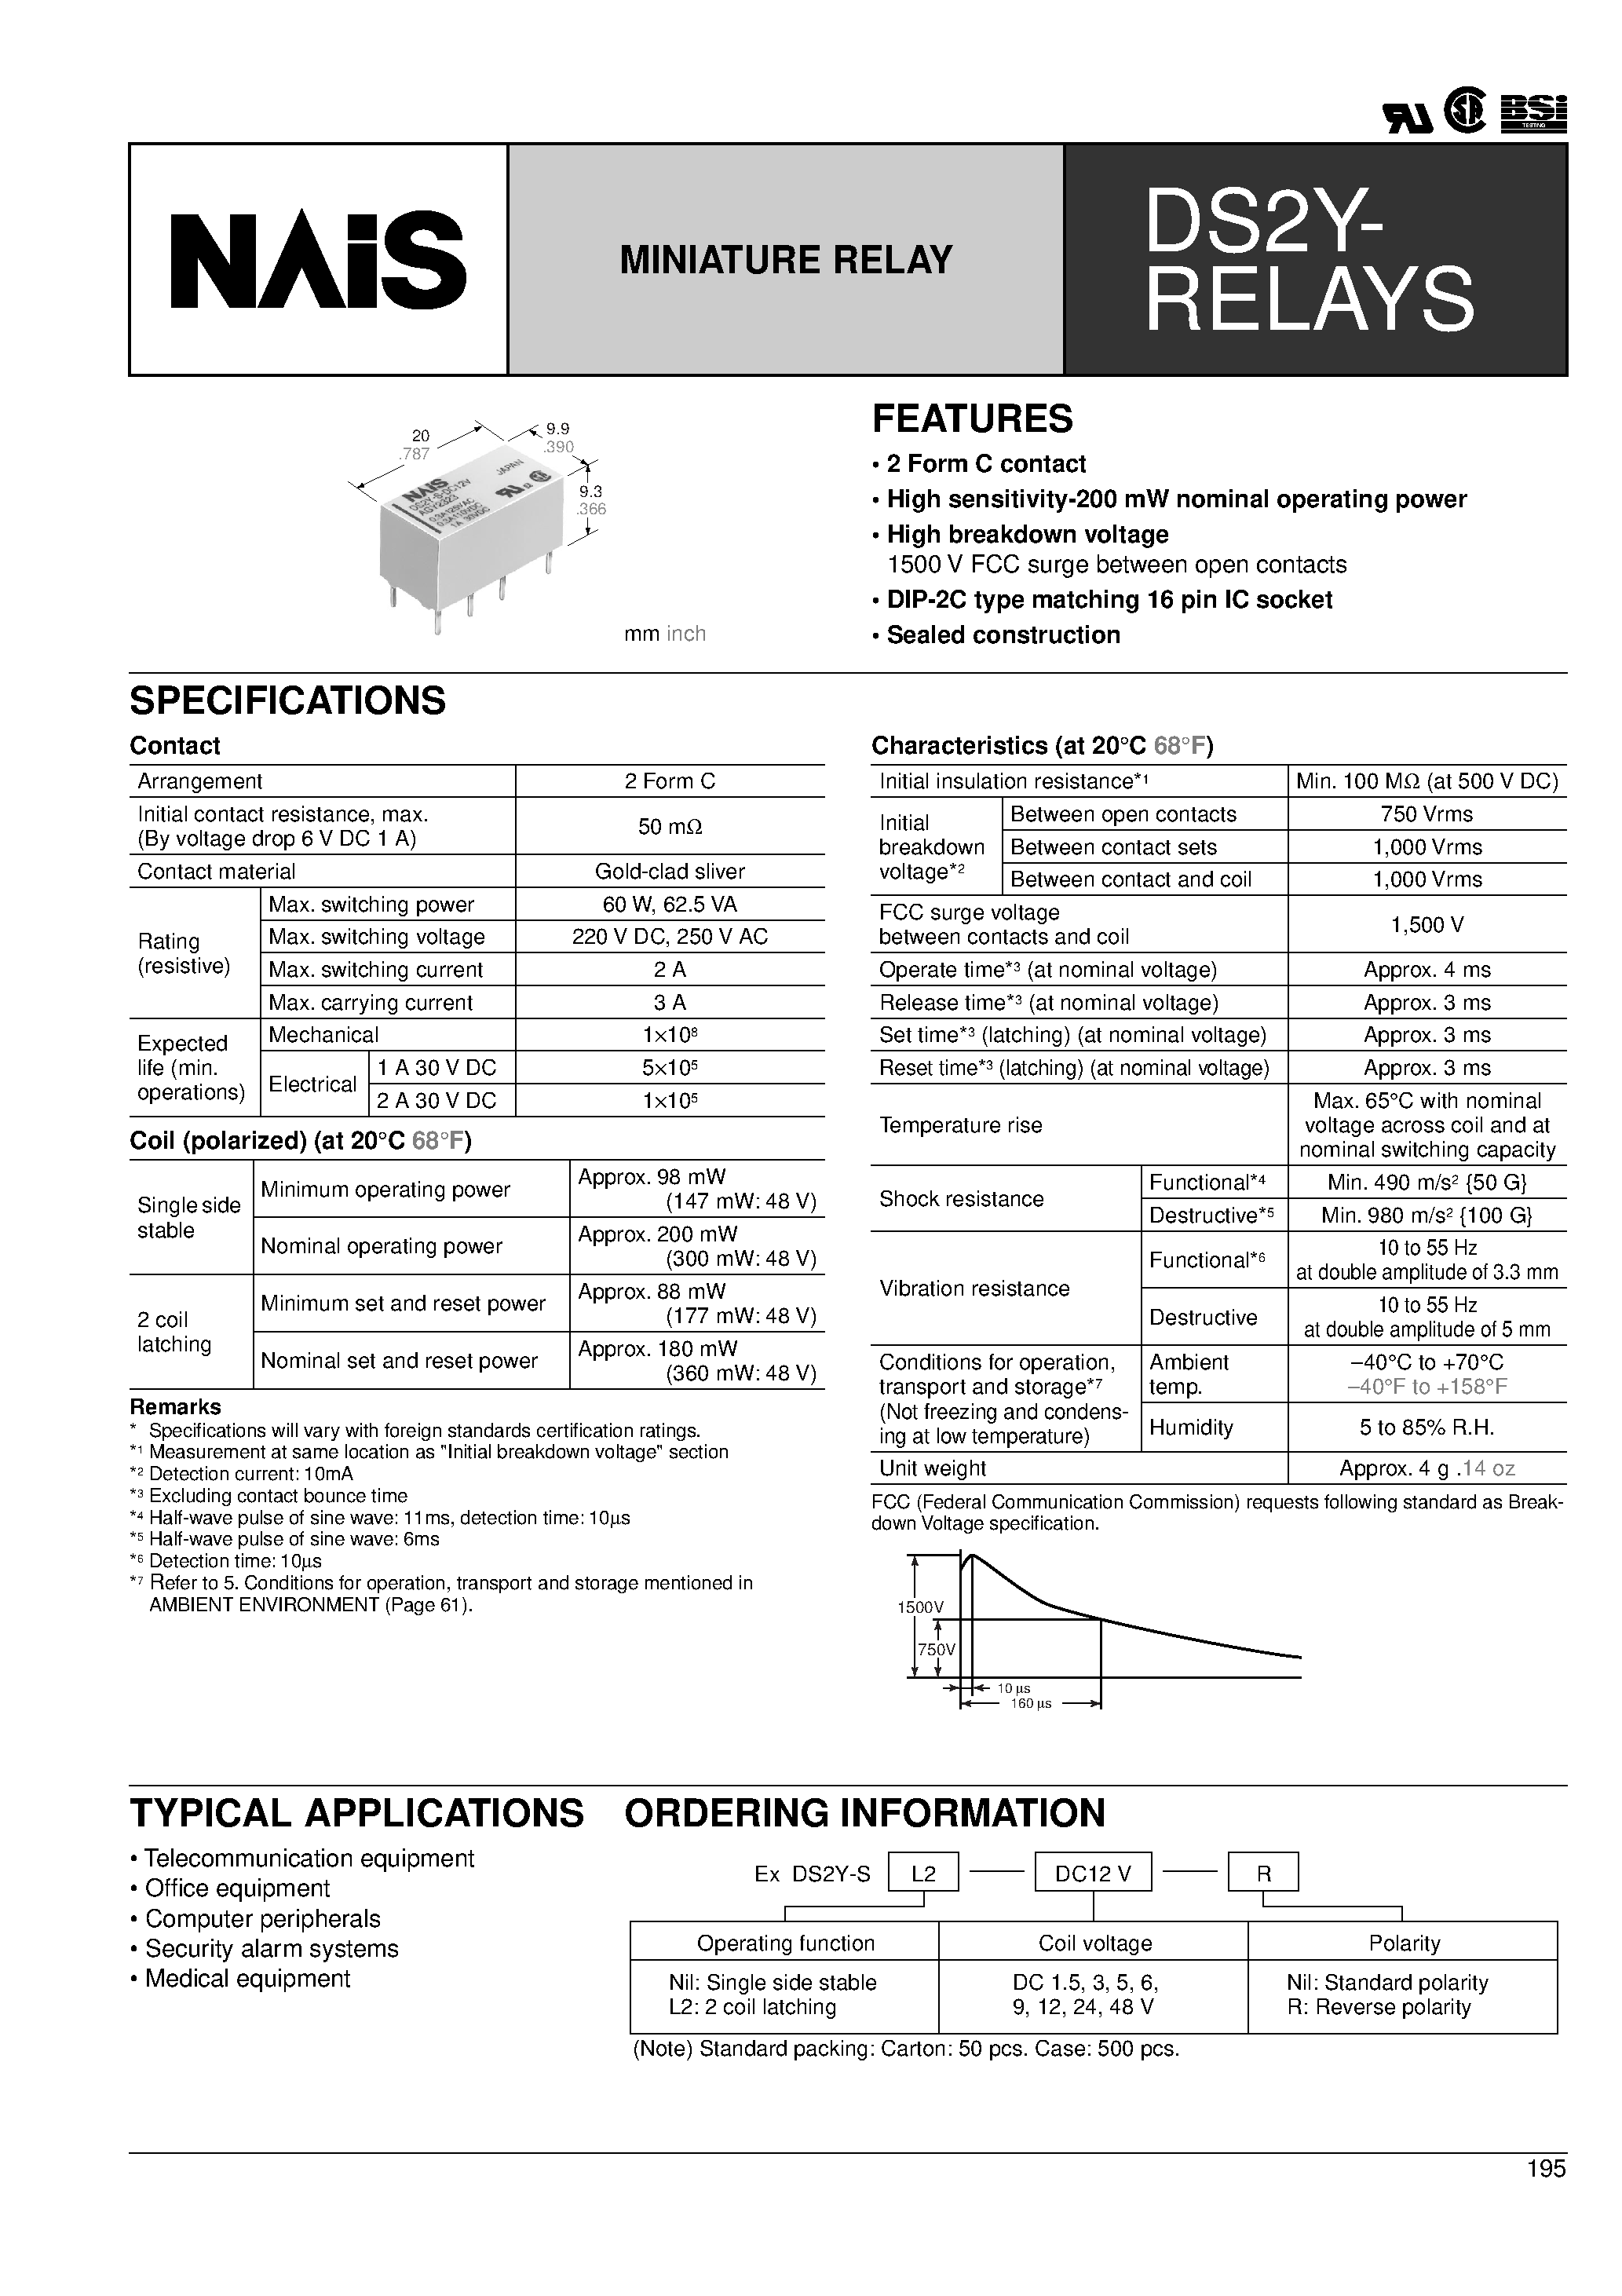 Datasheet DS2Y-S-DC1.5V - 2 Form C contact High sensitivity-200 mW nominal operating power page 1